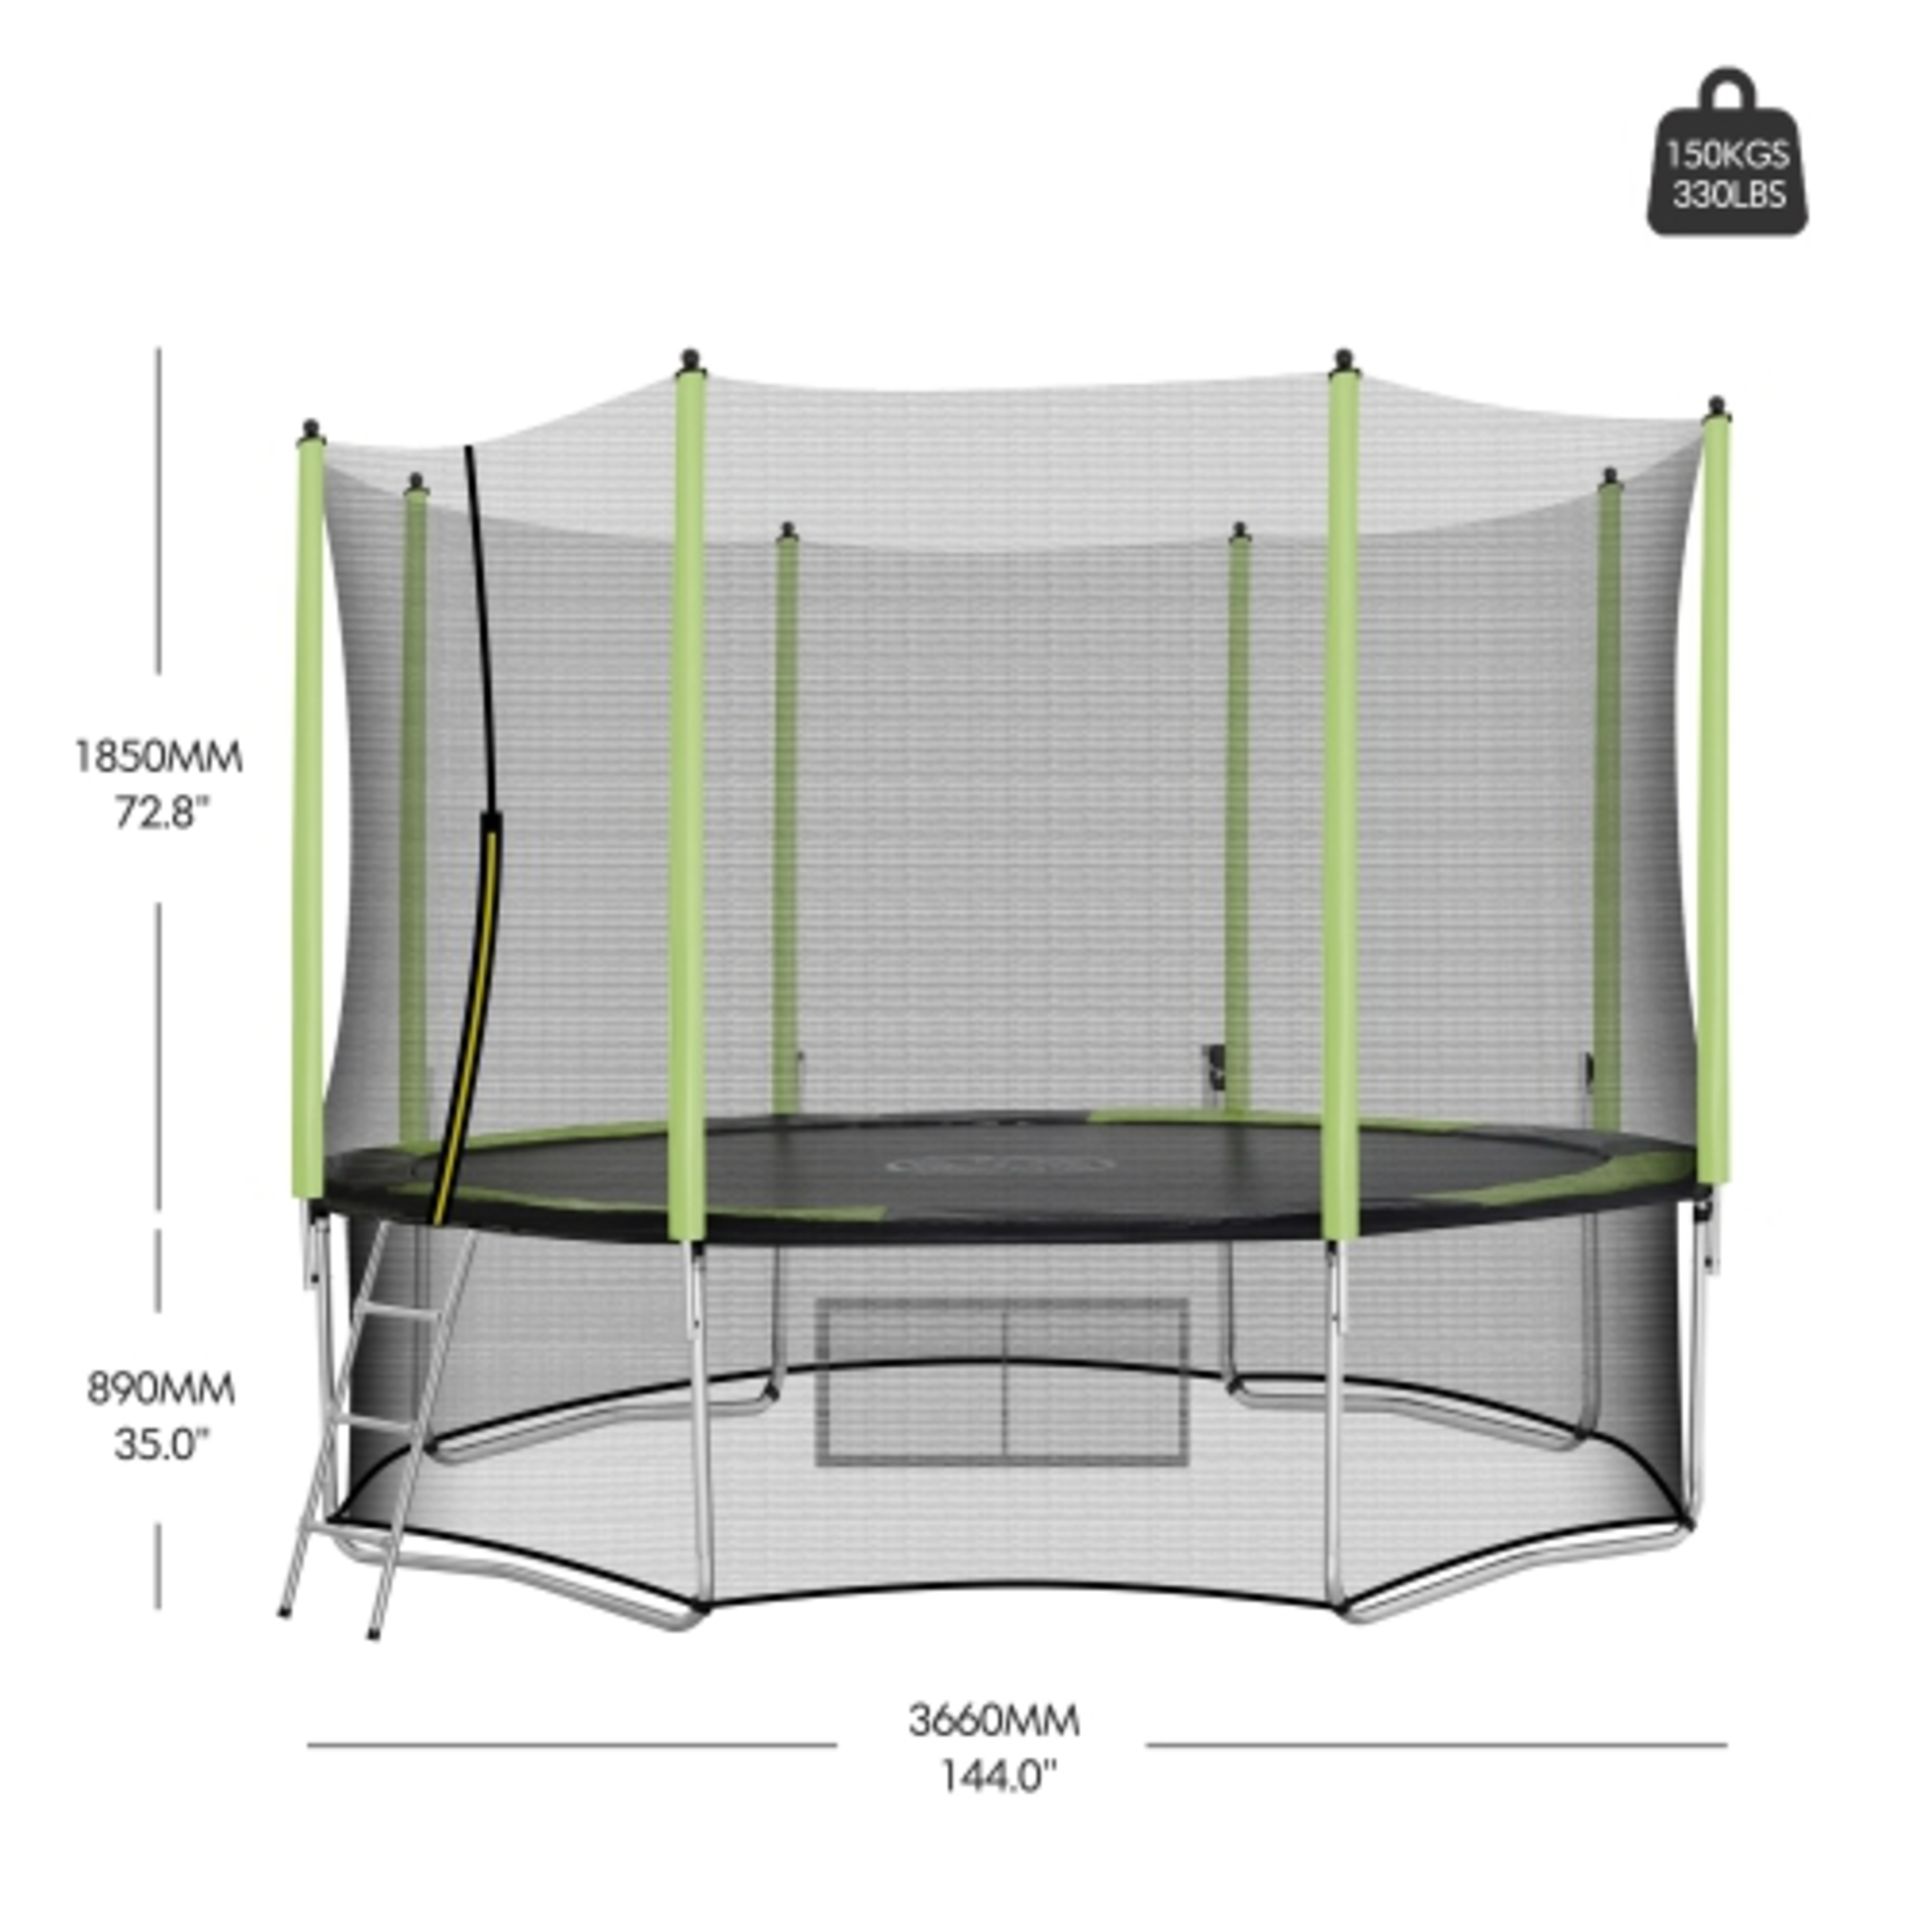 BRAND NEW Outdoor Trampoline with Safety Enclosure Net and Ladder - 12 Ft Backyard Trampolines for - Image 5 of 5